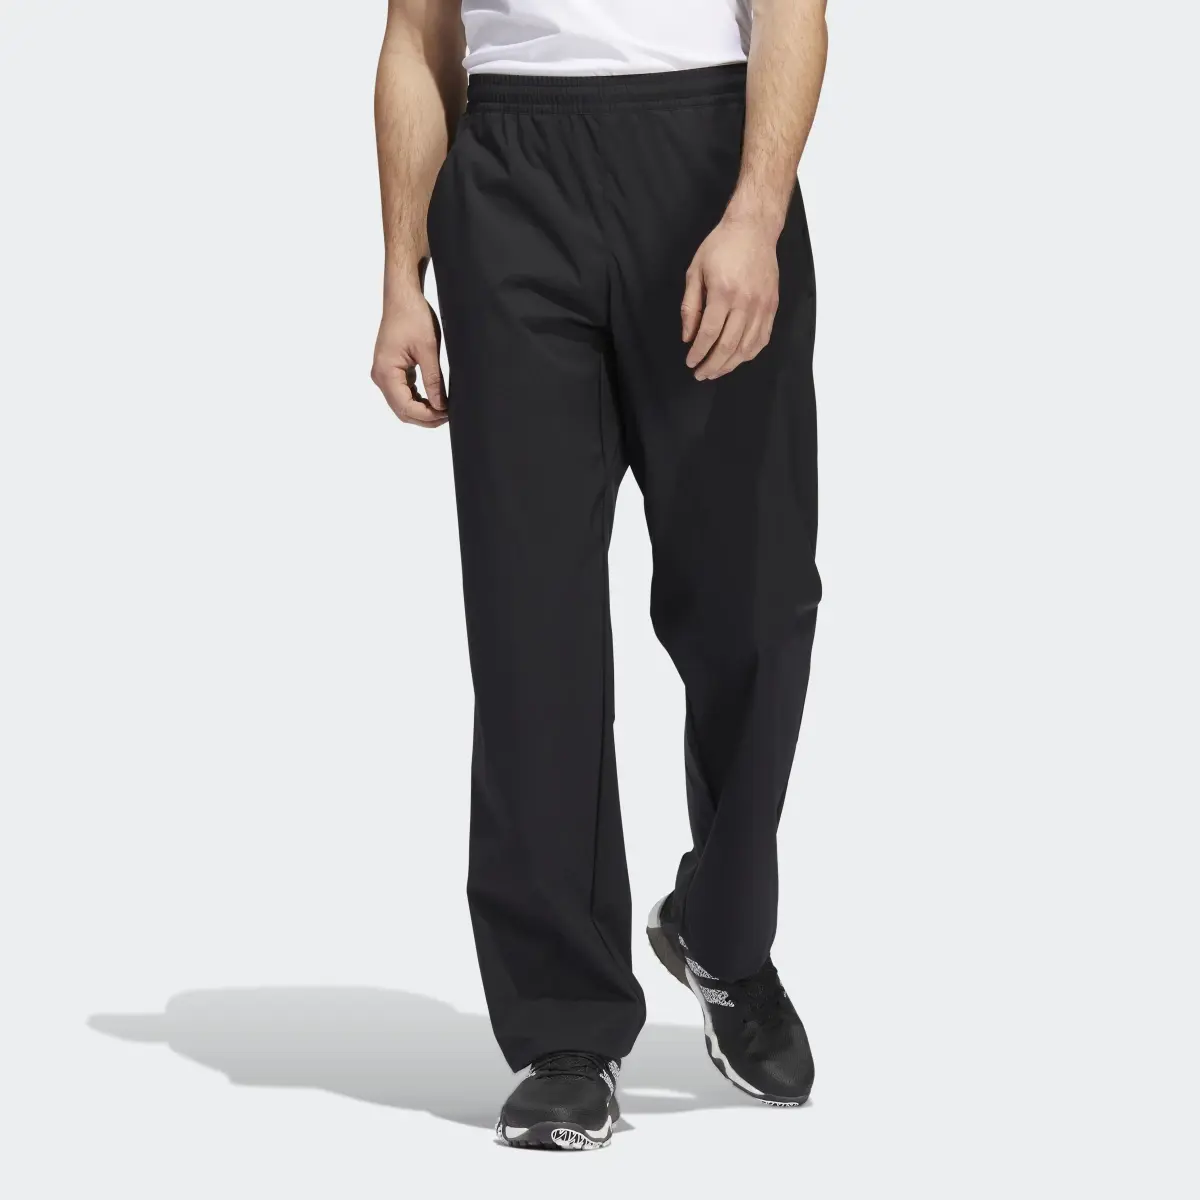 Adidas Provisional Golf Tracksuit Bottoms. 1